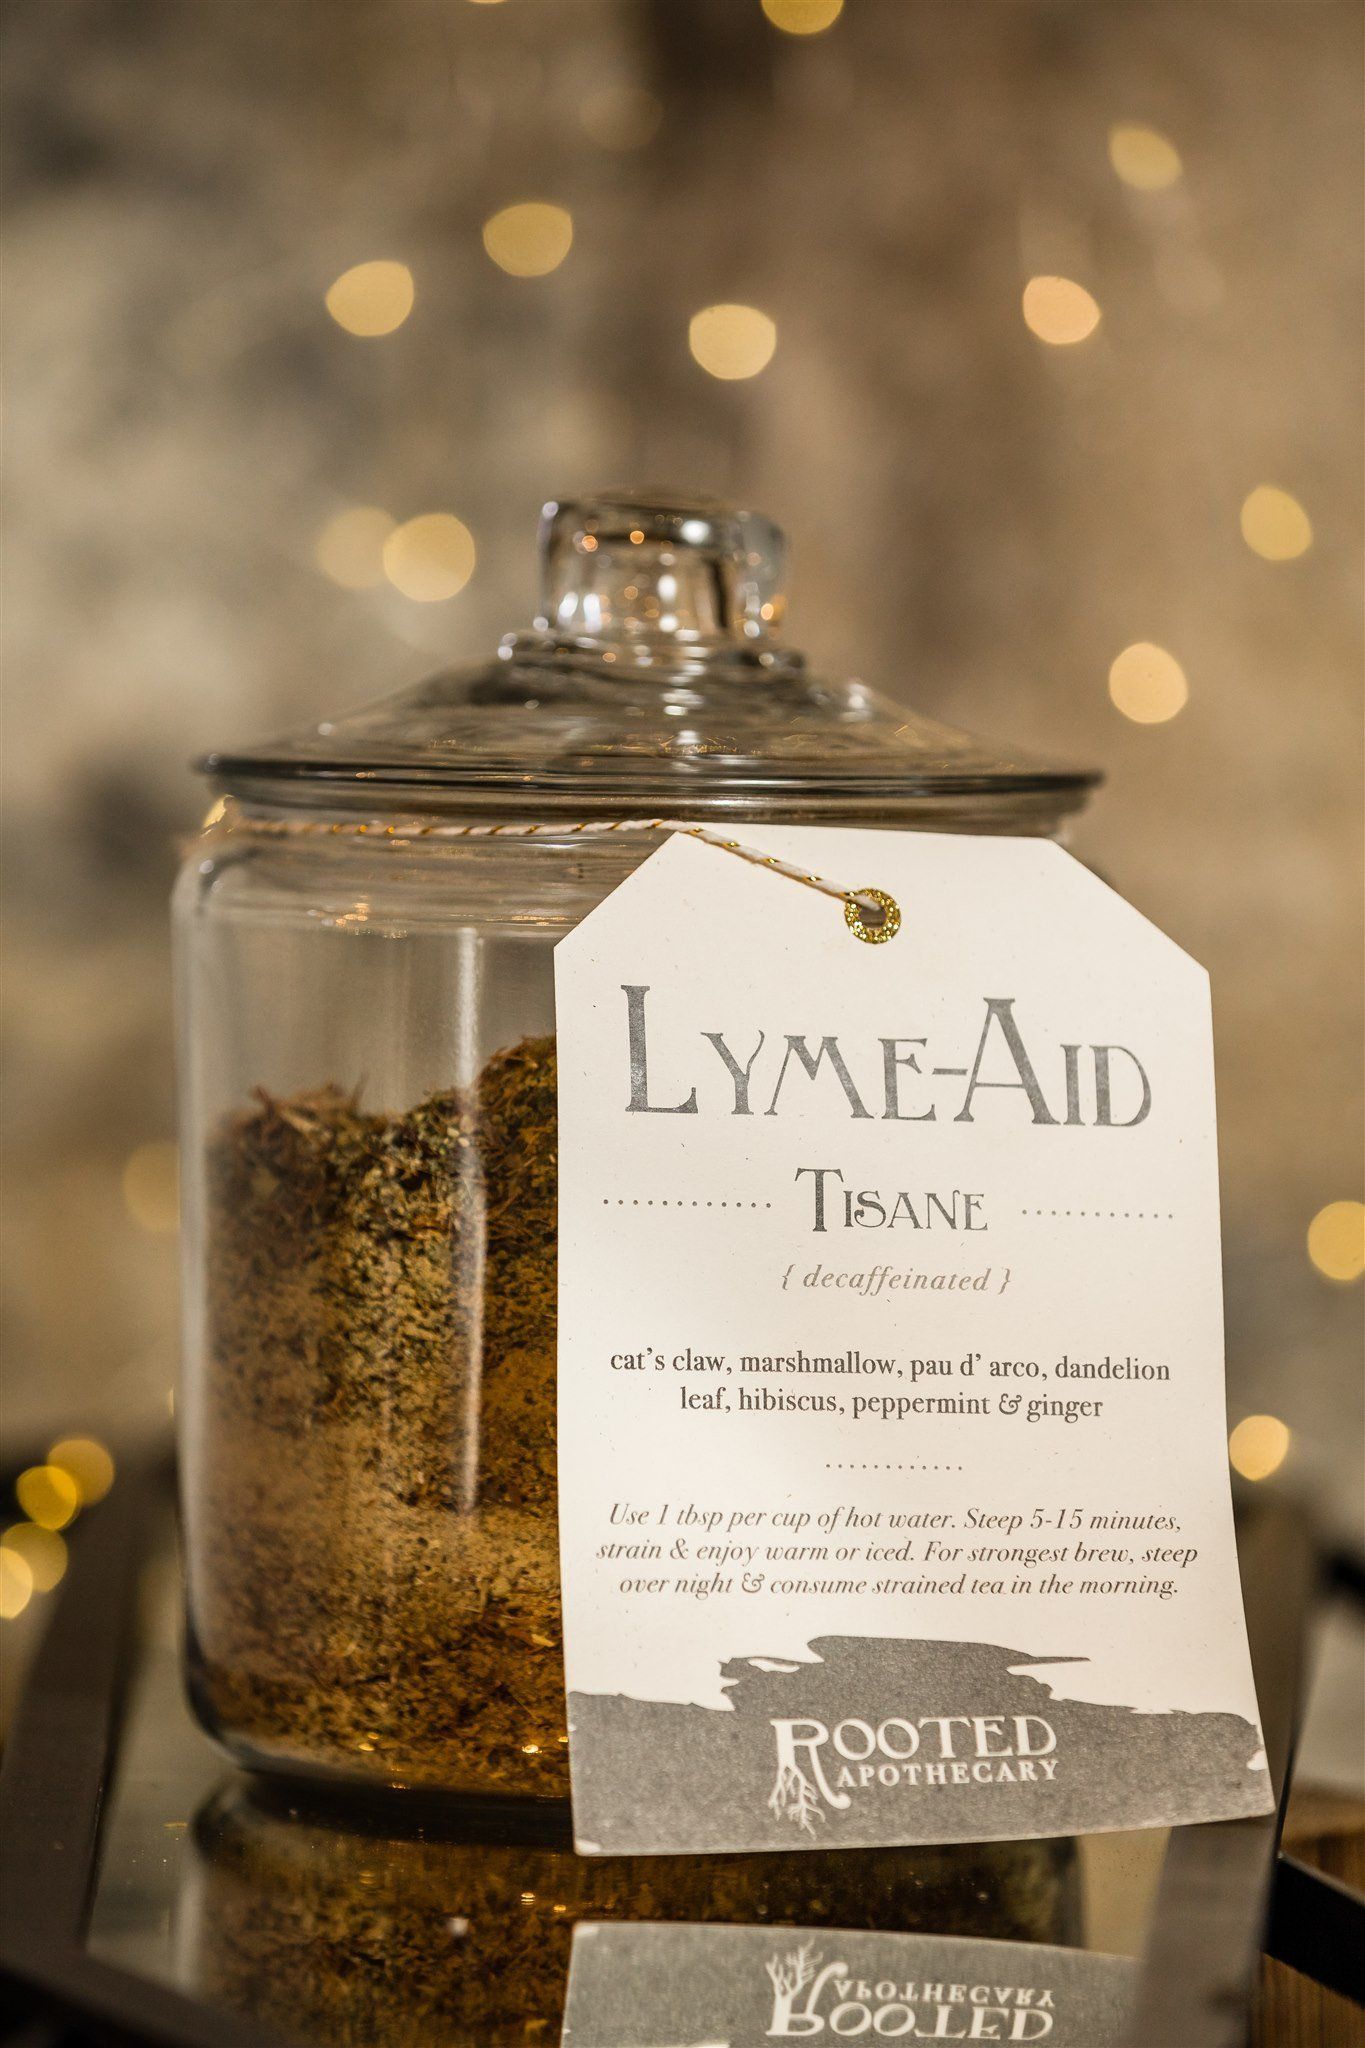 best-natural-organic-lyme-aid-tea-rooted-apothecary.jpg